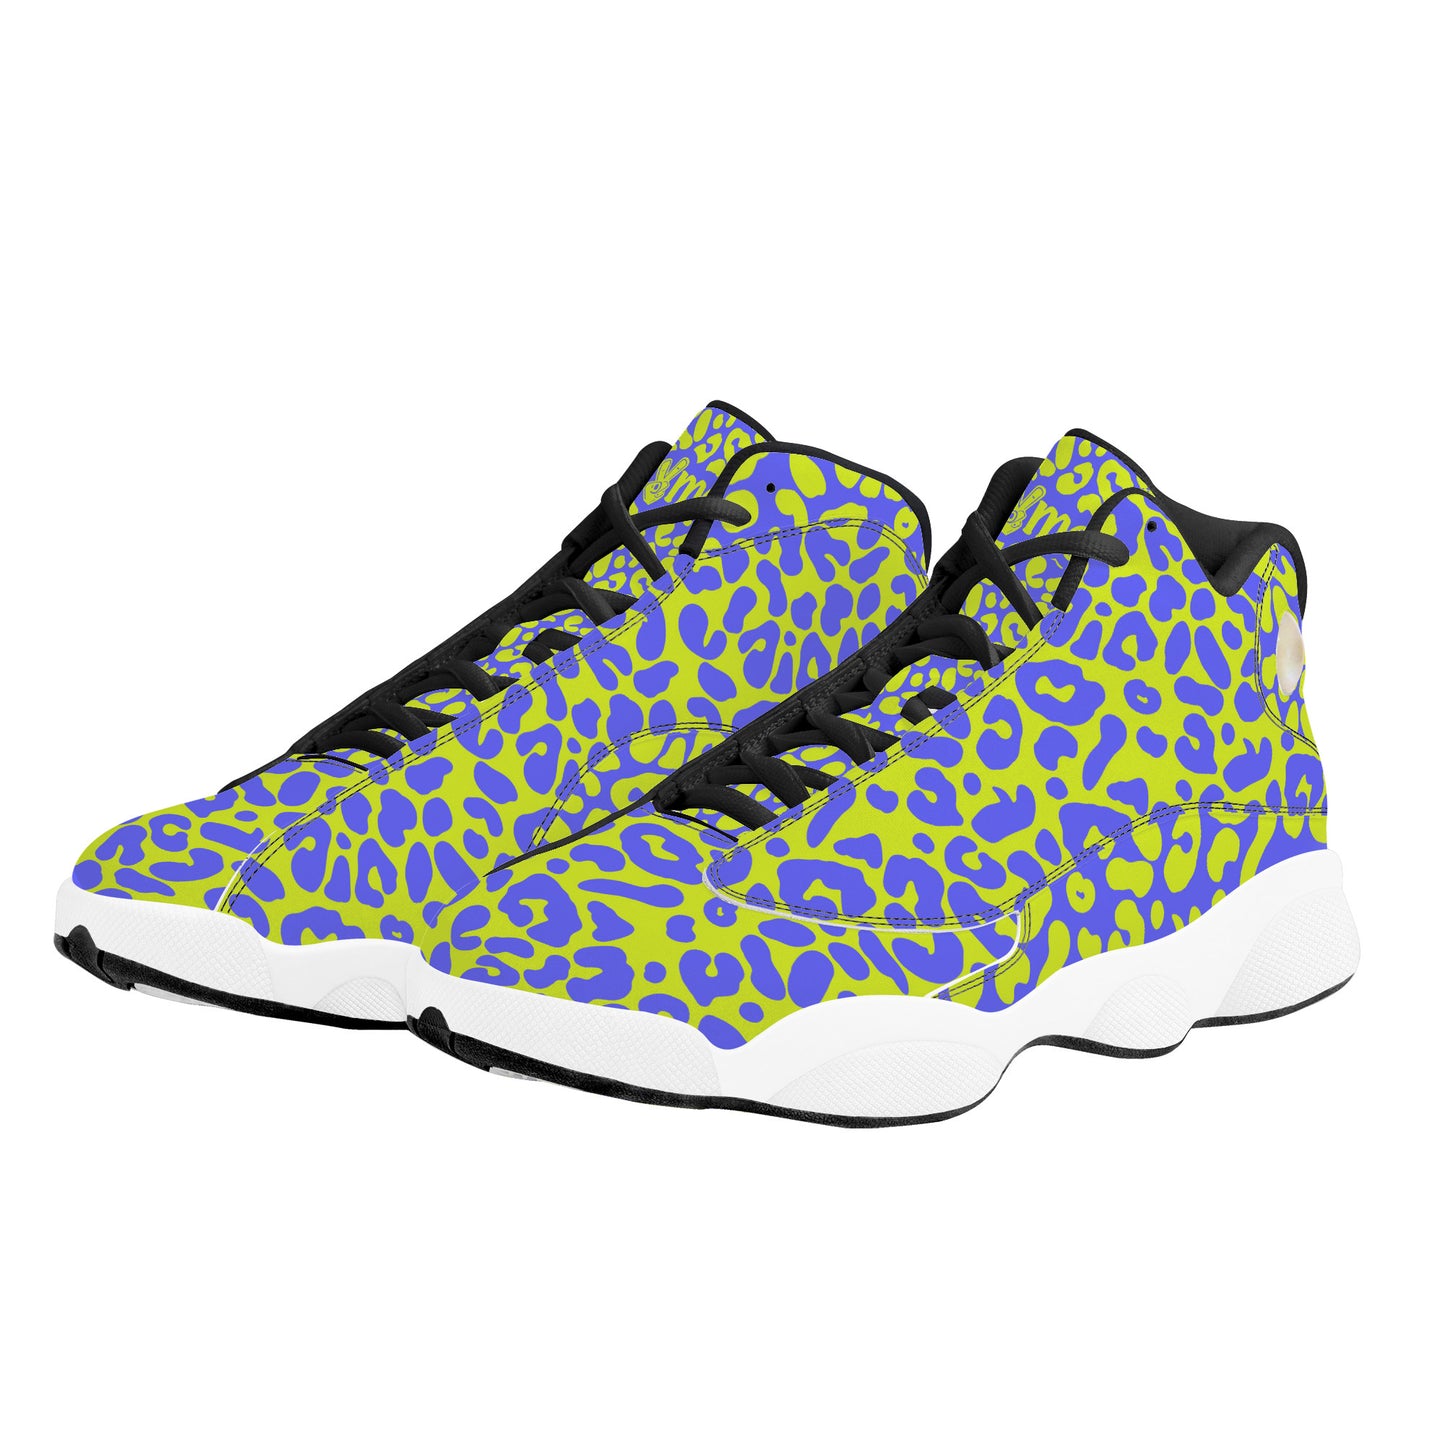 "Leopard" Basketball Shoes